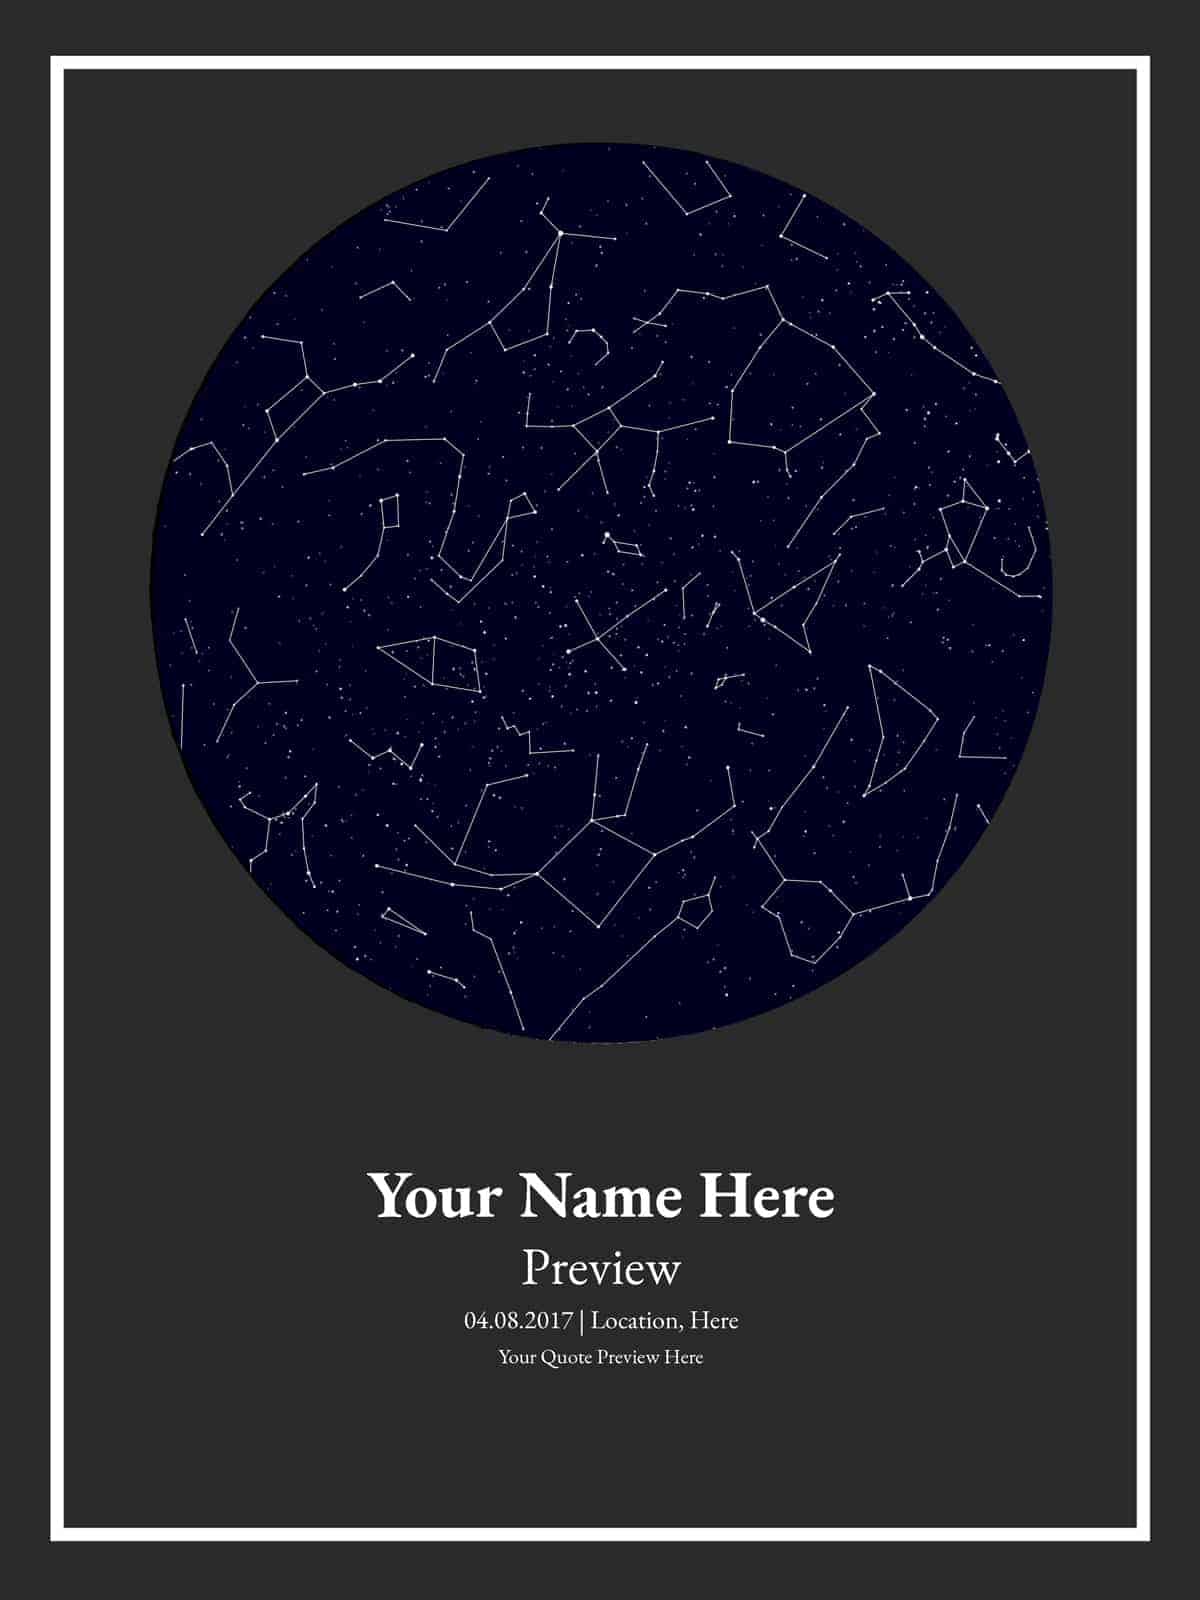 Custom and Personalized Star Map Poster Print - https://themoonjoy.com